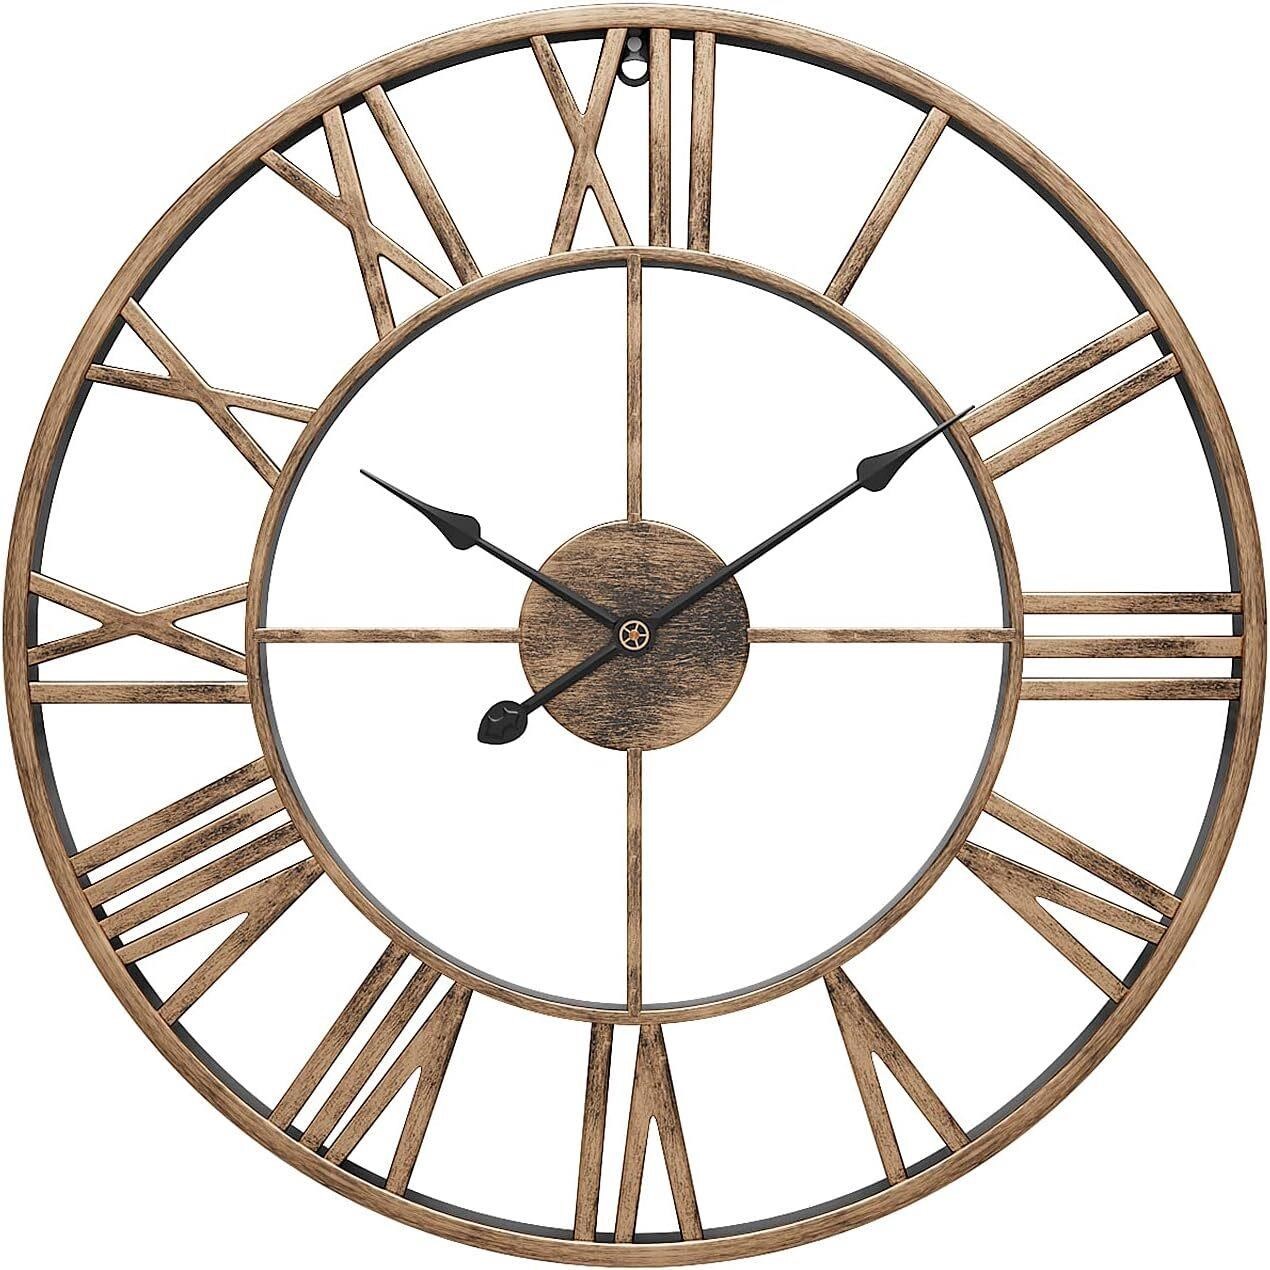 24 Large Roman Numeral Wall Clock  Silent Non